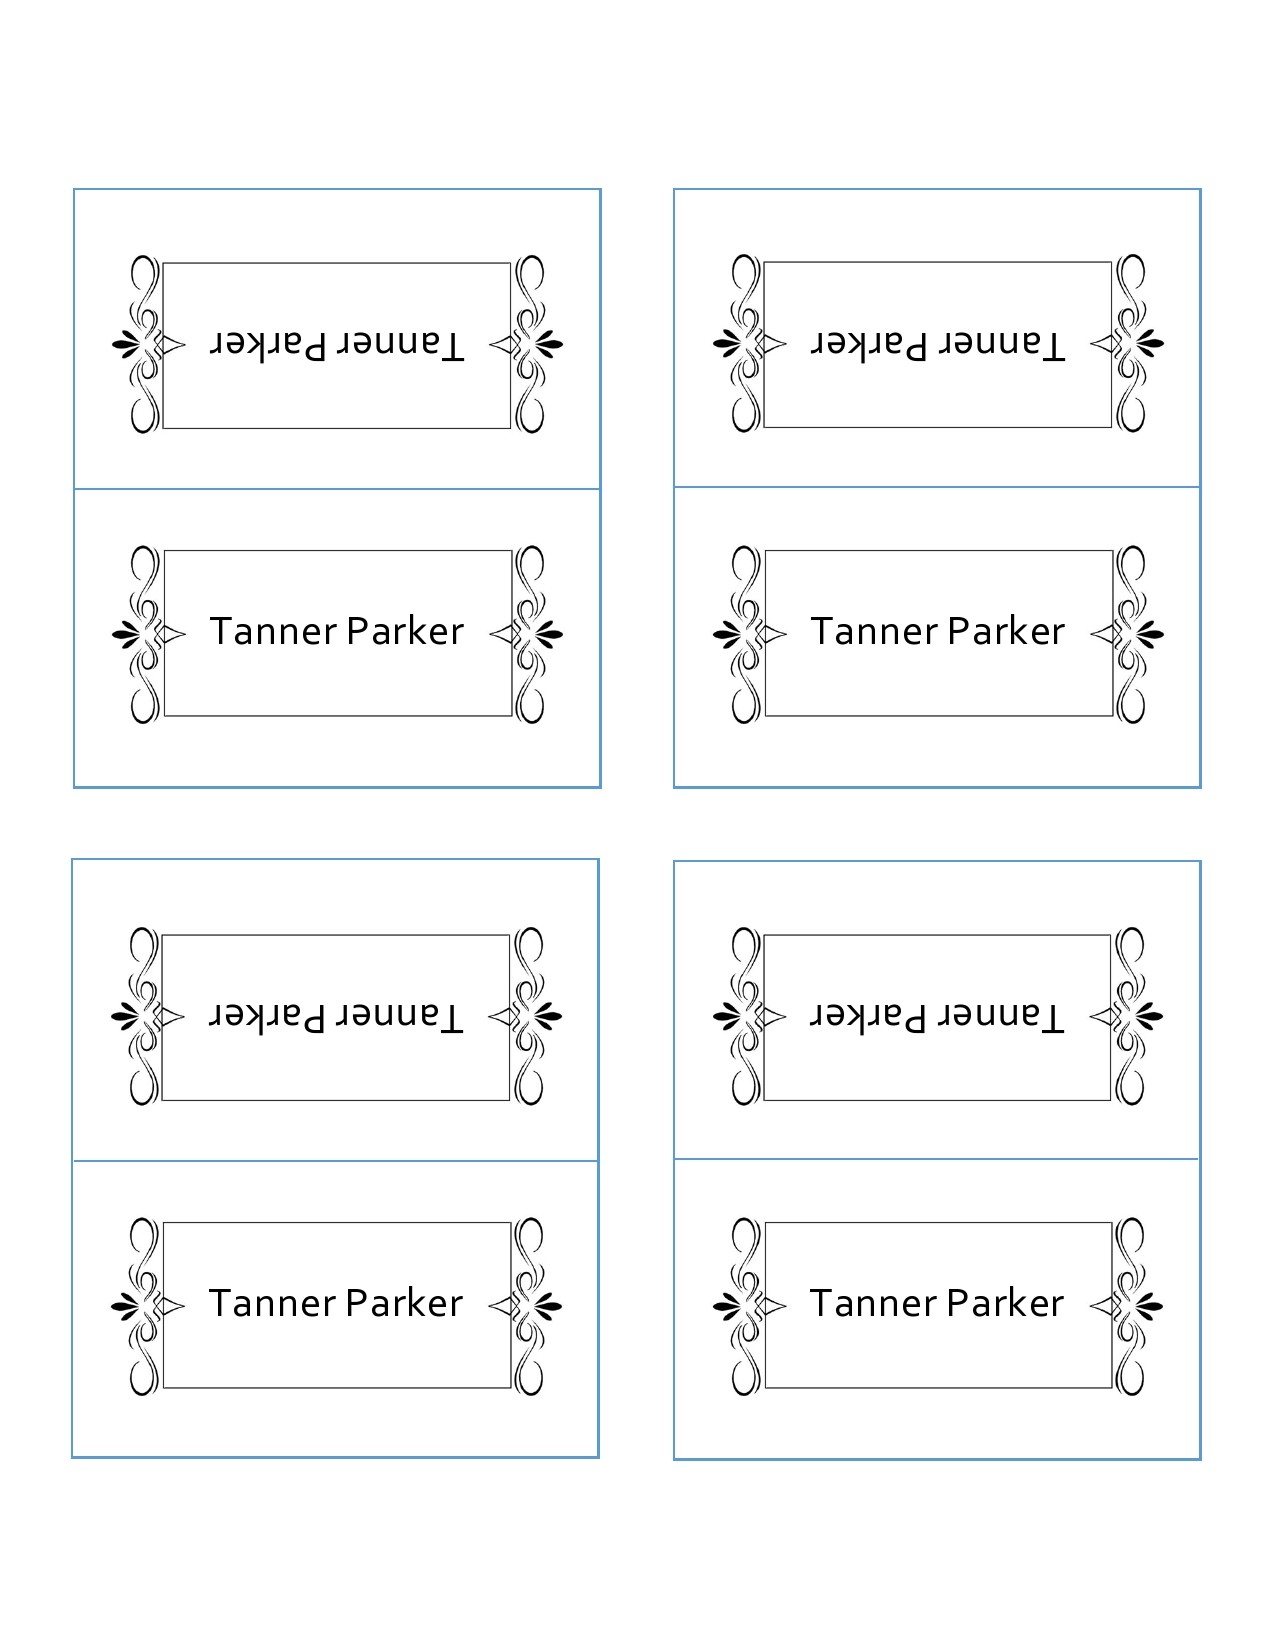 place card templates - Online Discount Shop for Electronics Pertaining To Free Place Card Templates 6 Per Page